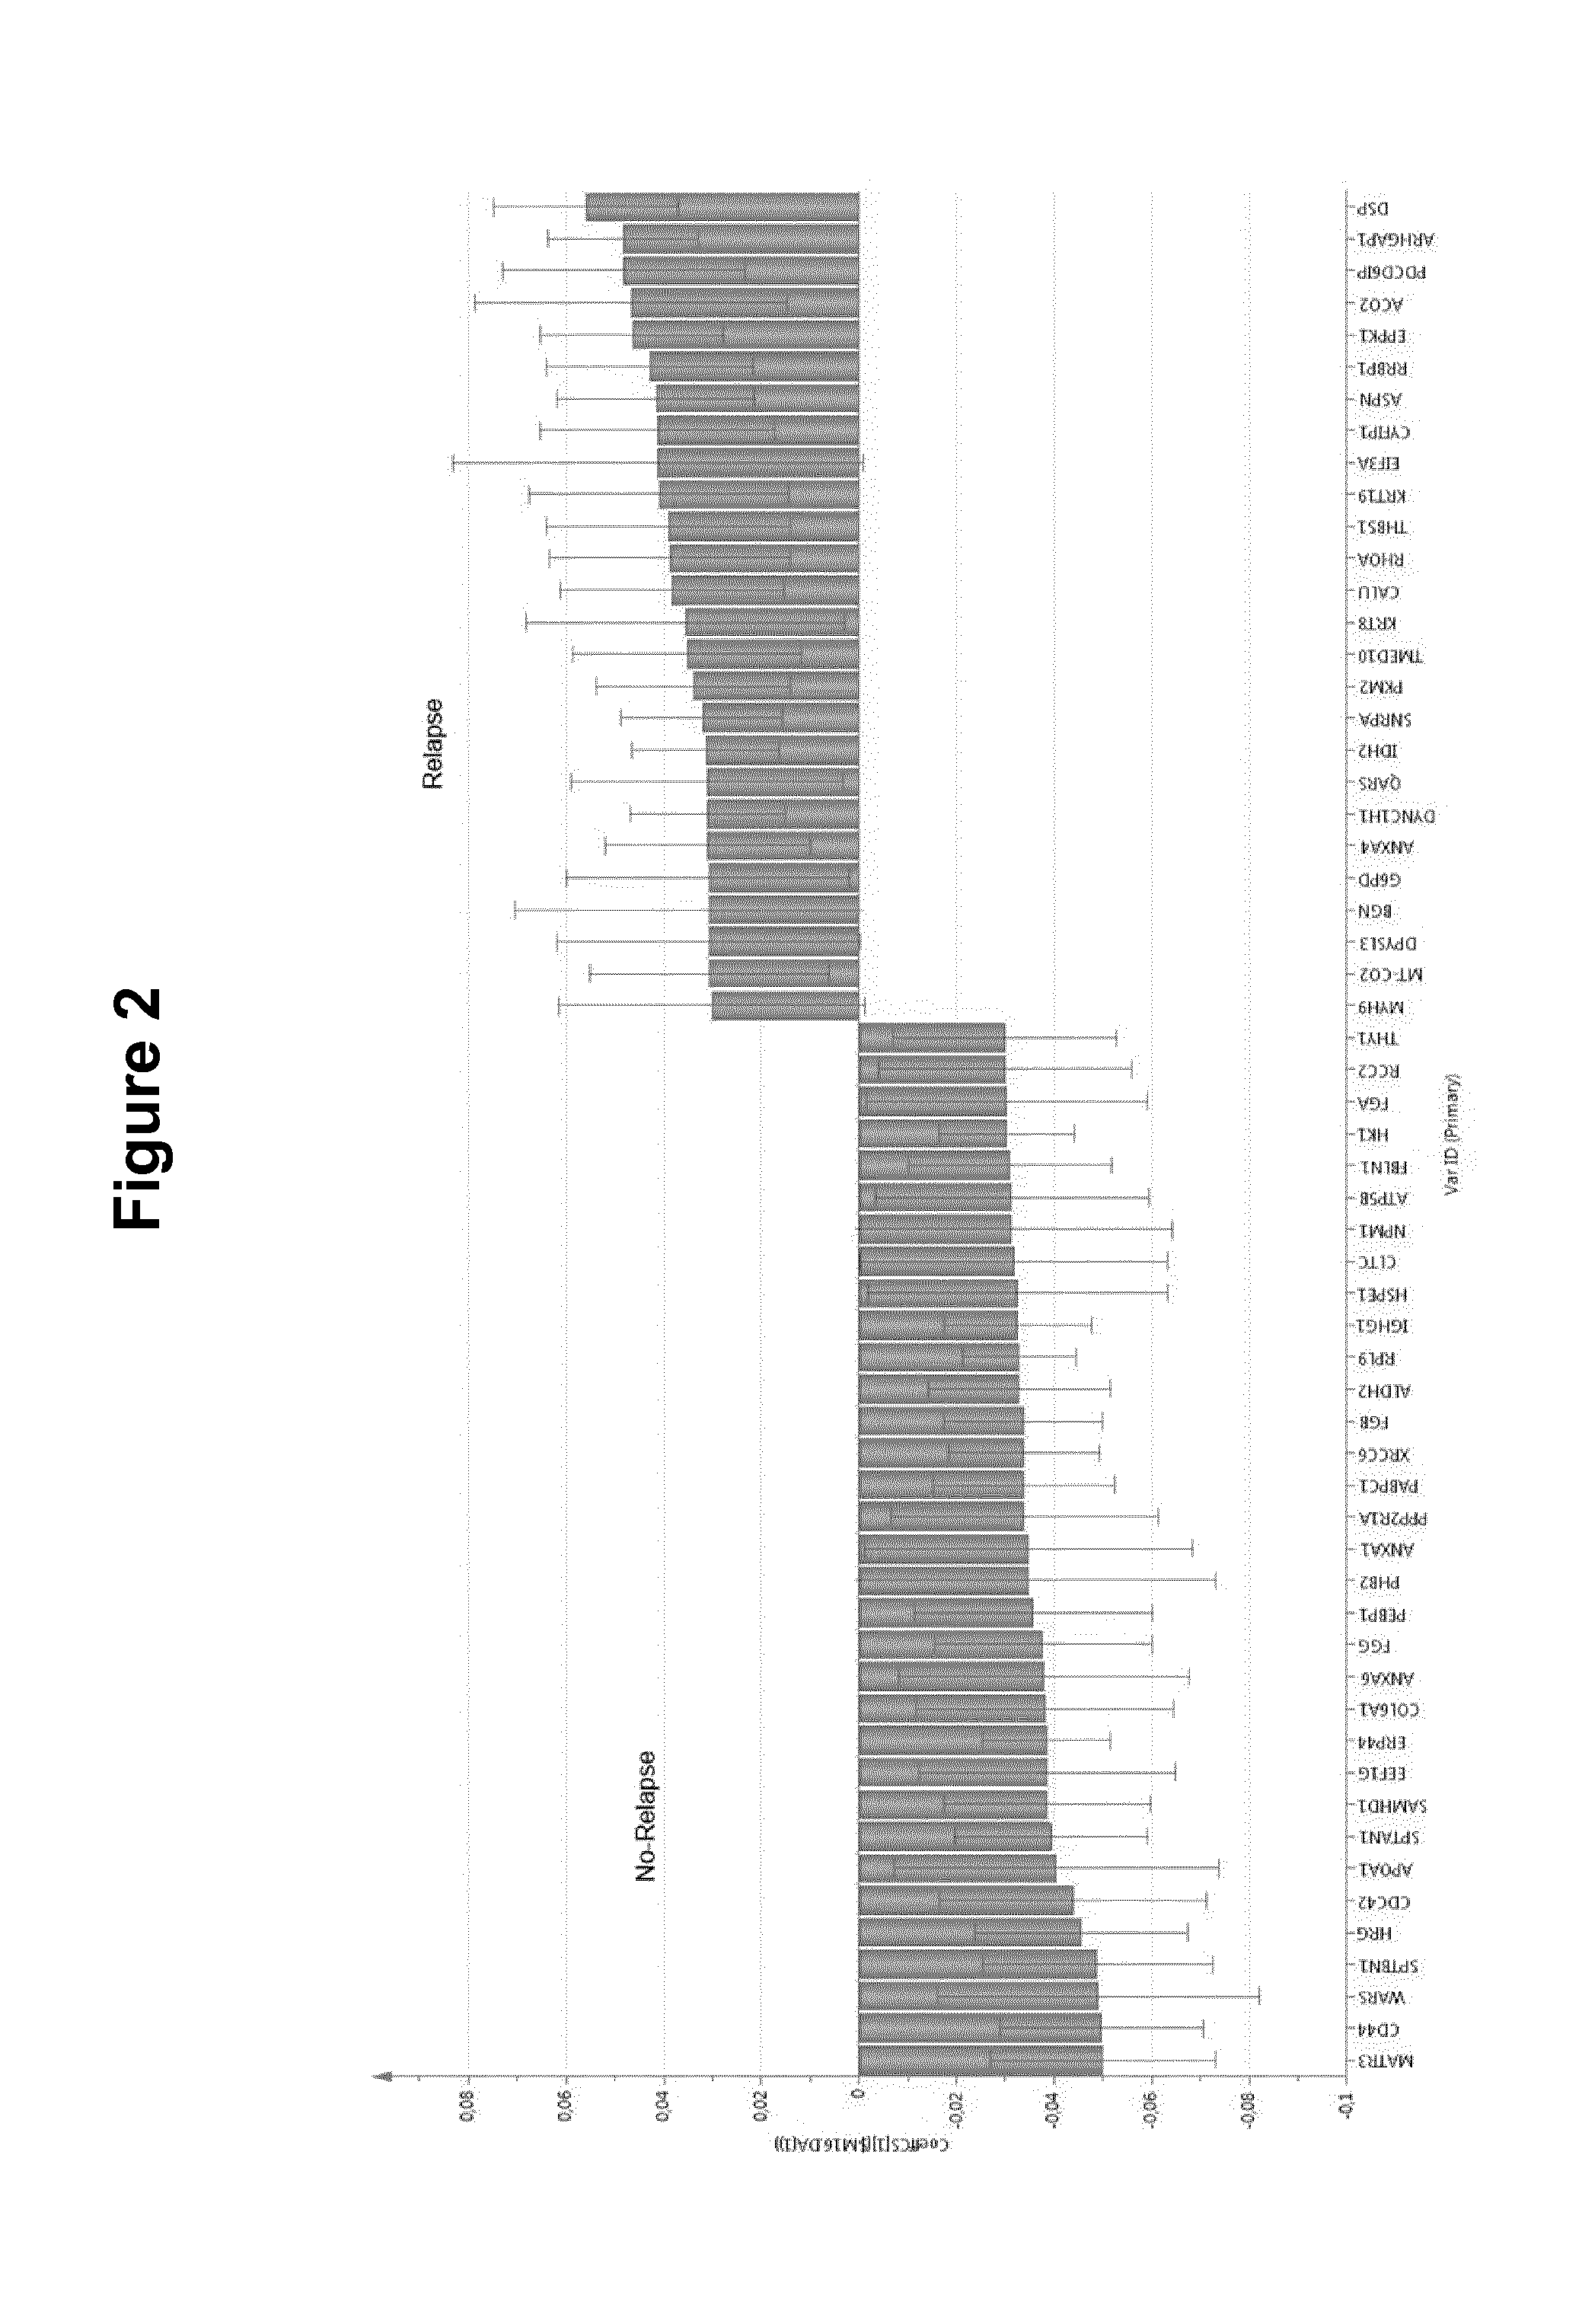 Method for In Vitro Diagnosing and Prognosing of Triple Negative Breast Cancer Recurrence